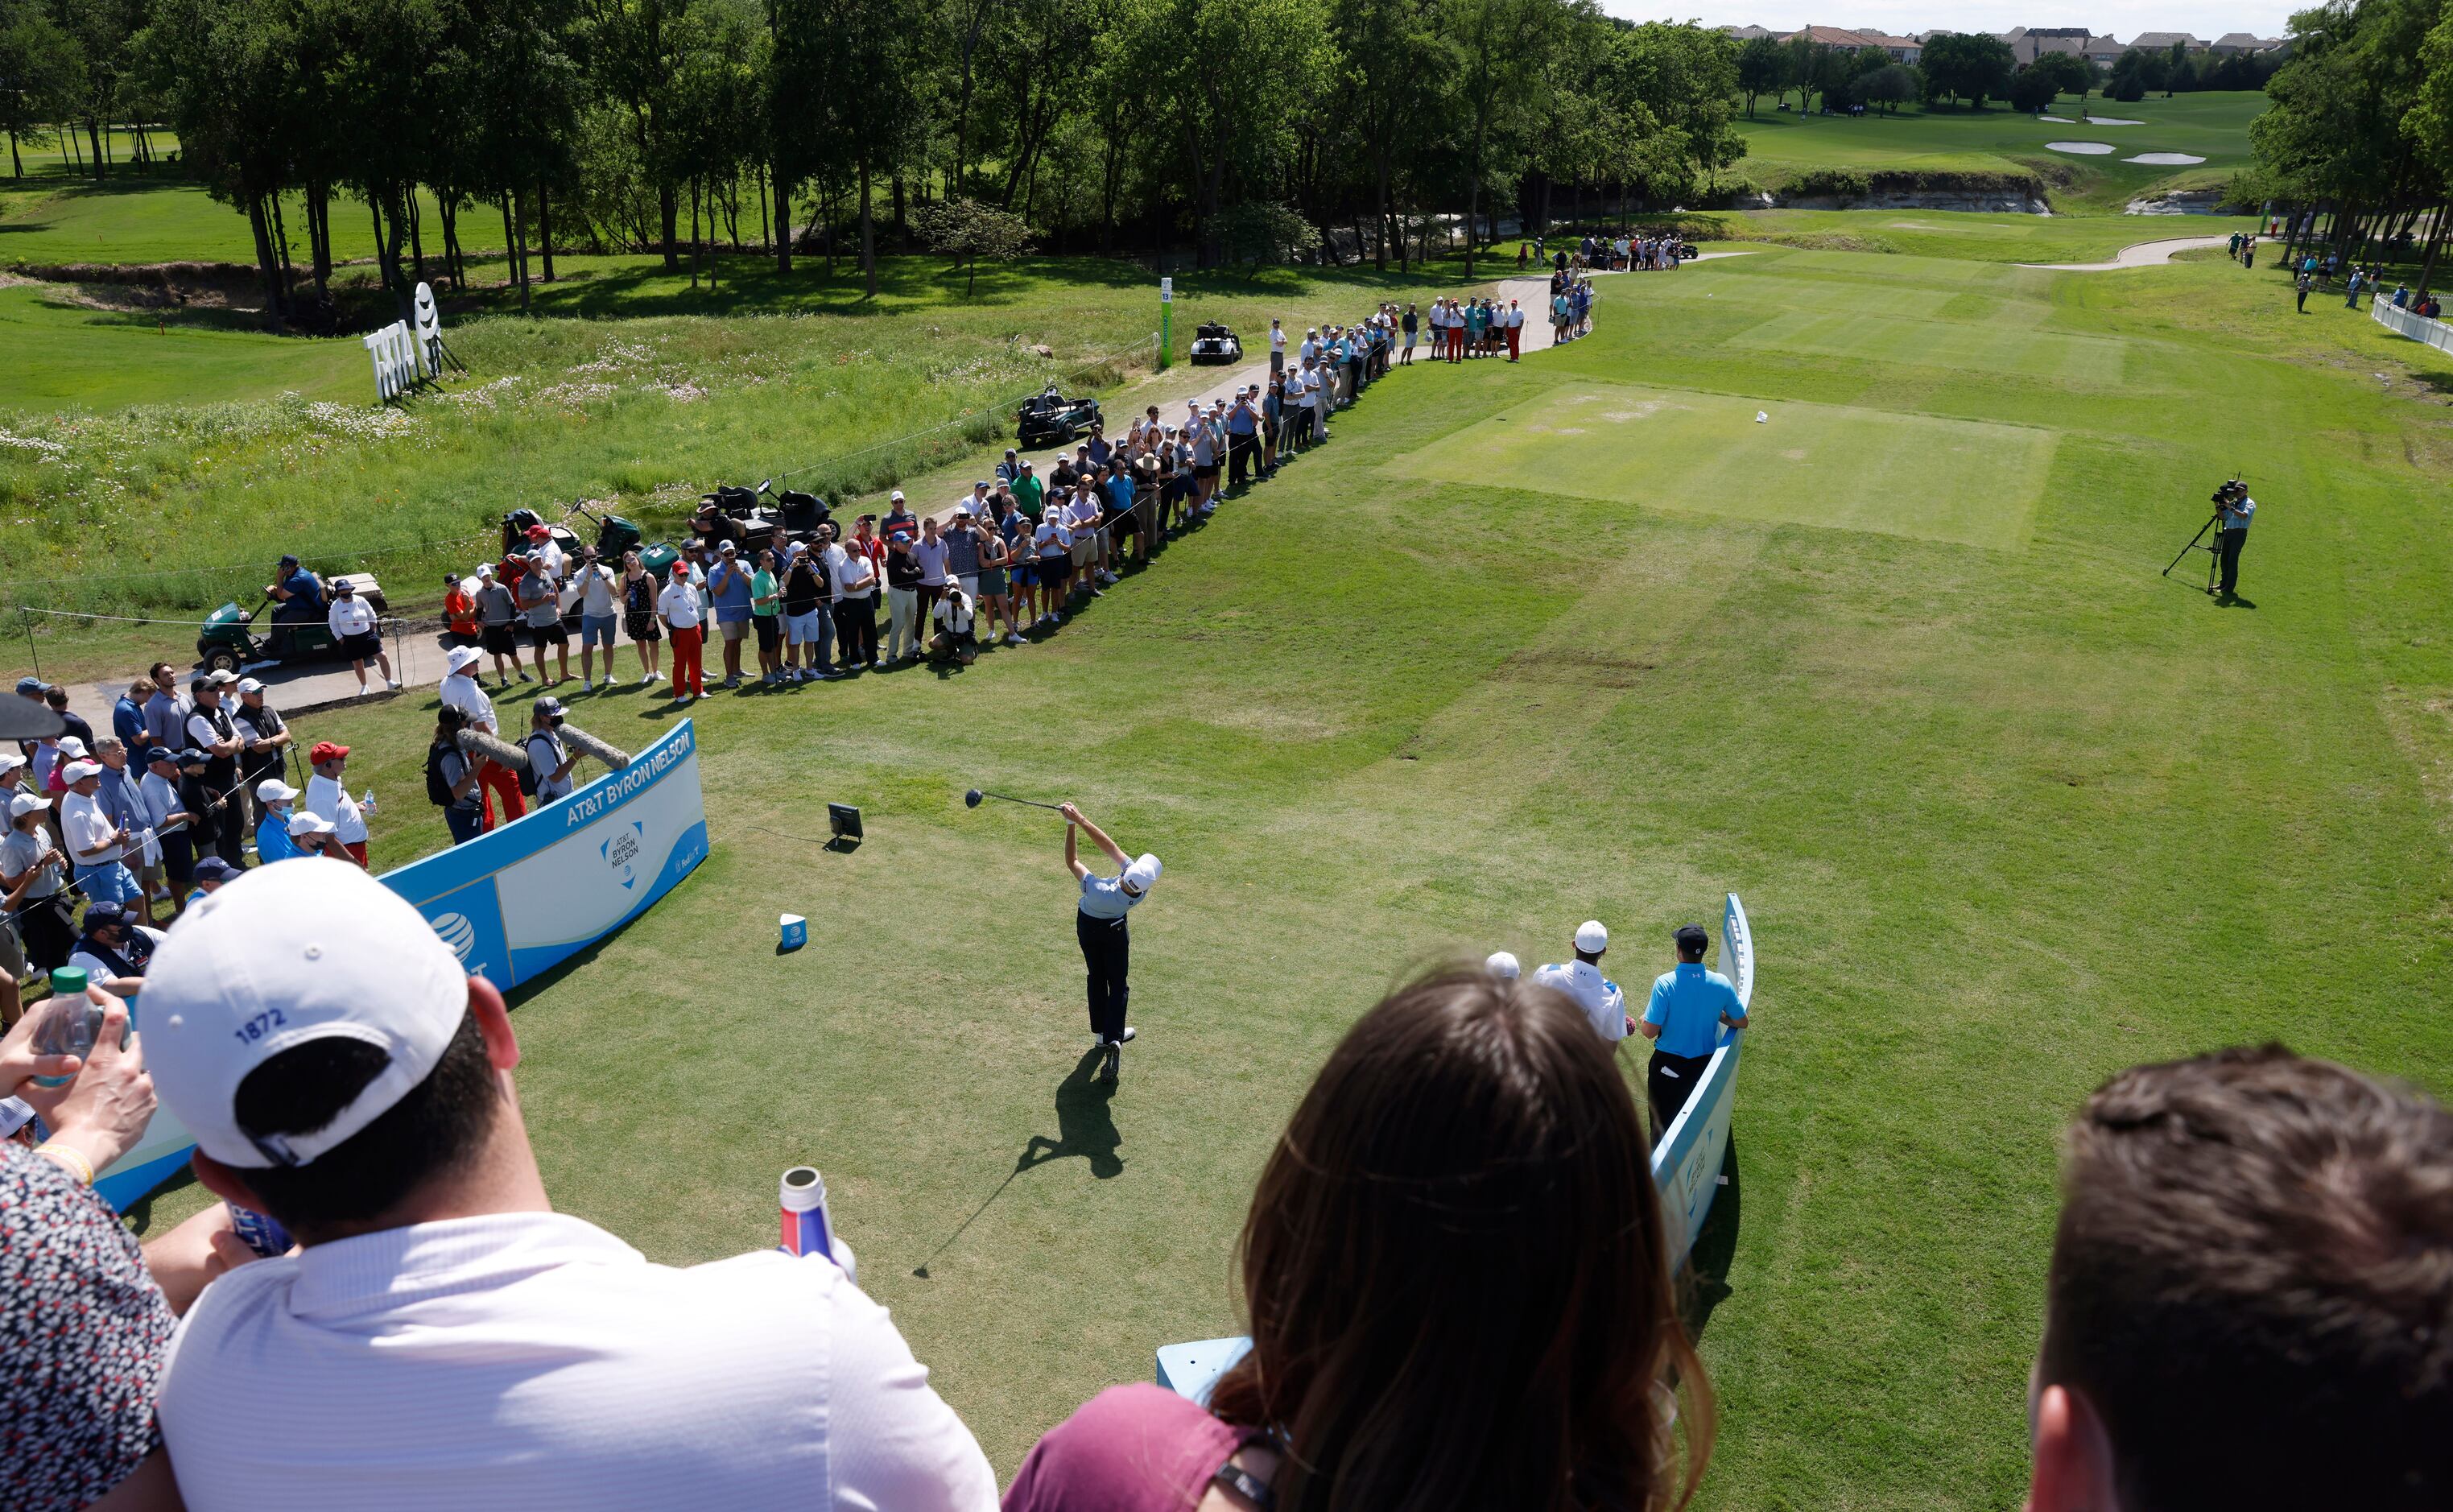 Fans watch as Will Zalatoris tees off on the 13th hole during round 1 of the AT&T Byron...